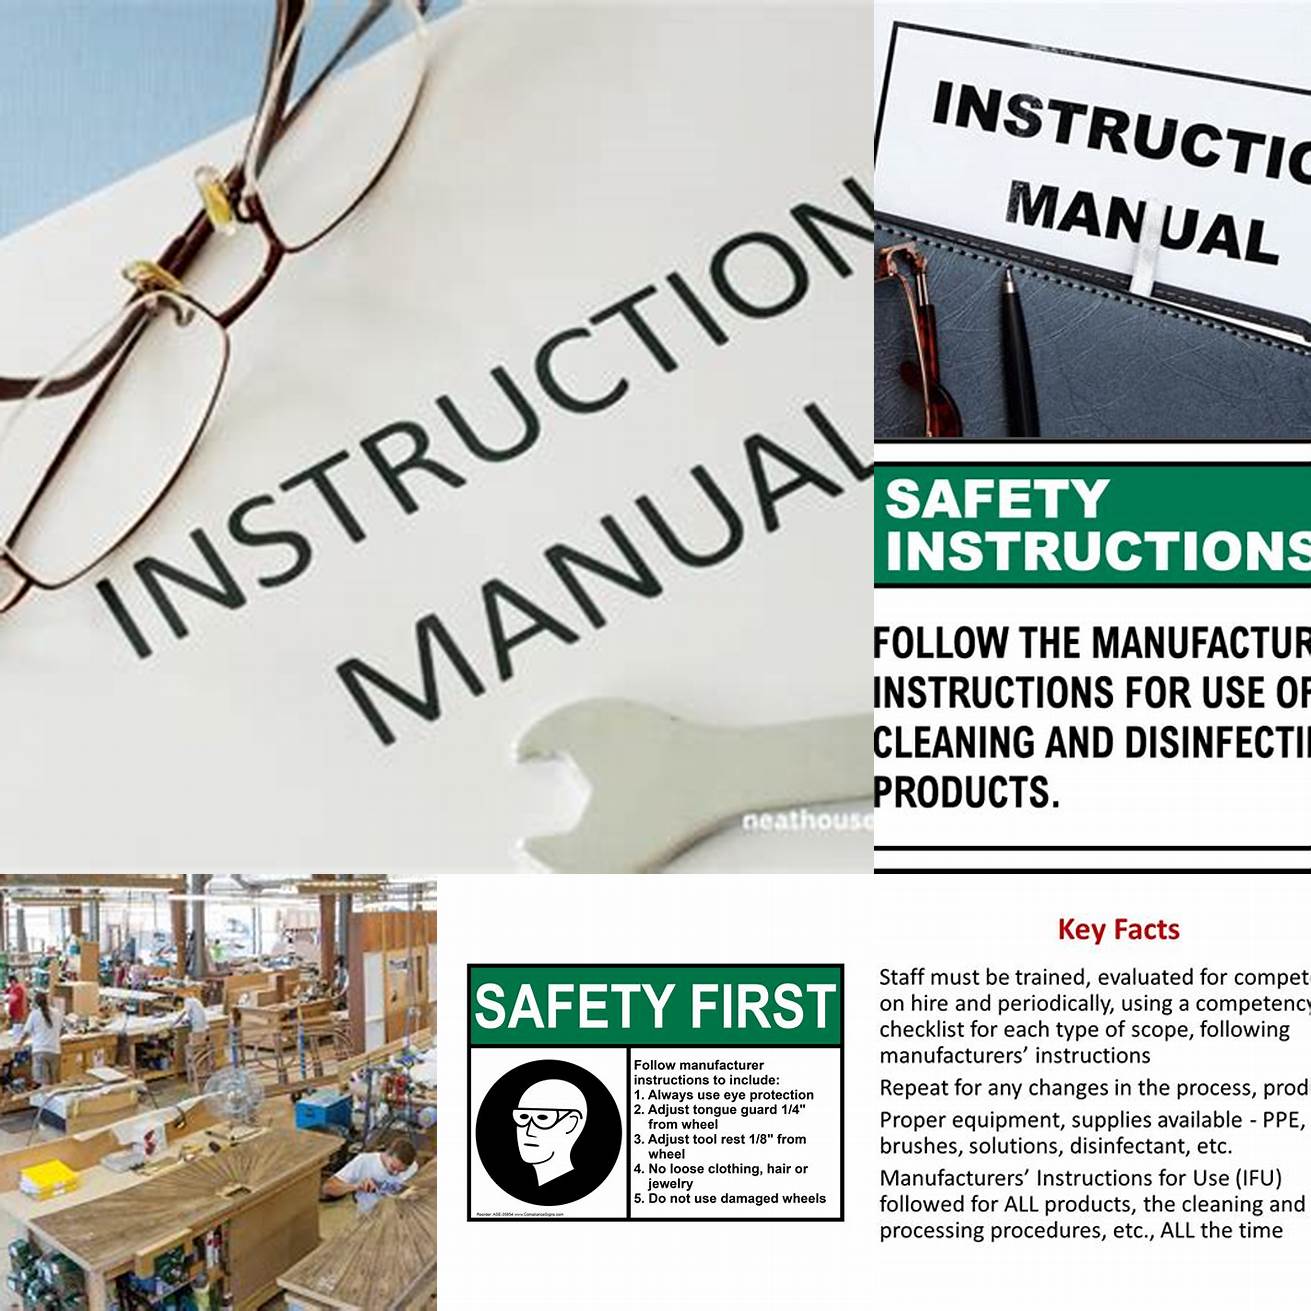 The importance of following the manufacturers instructions